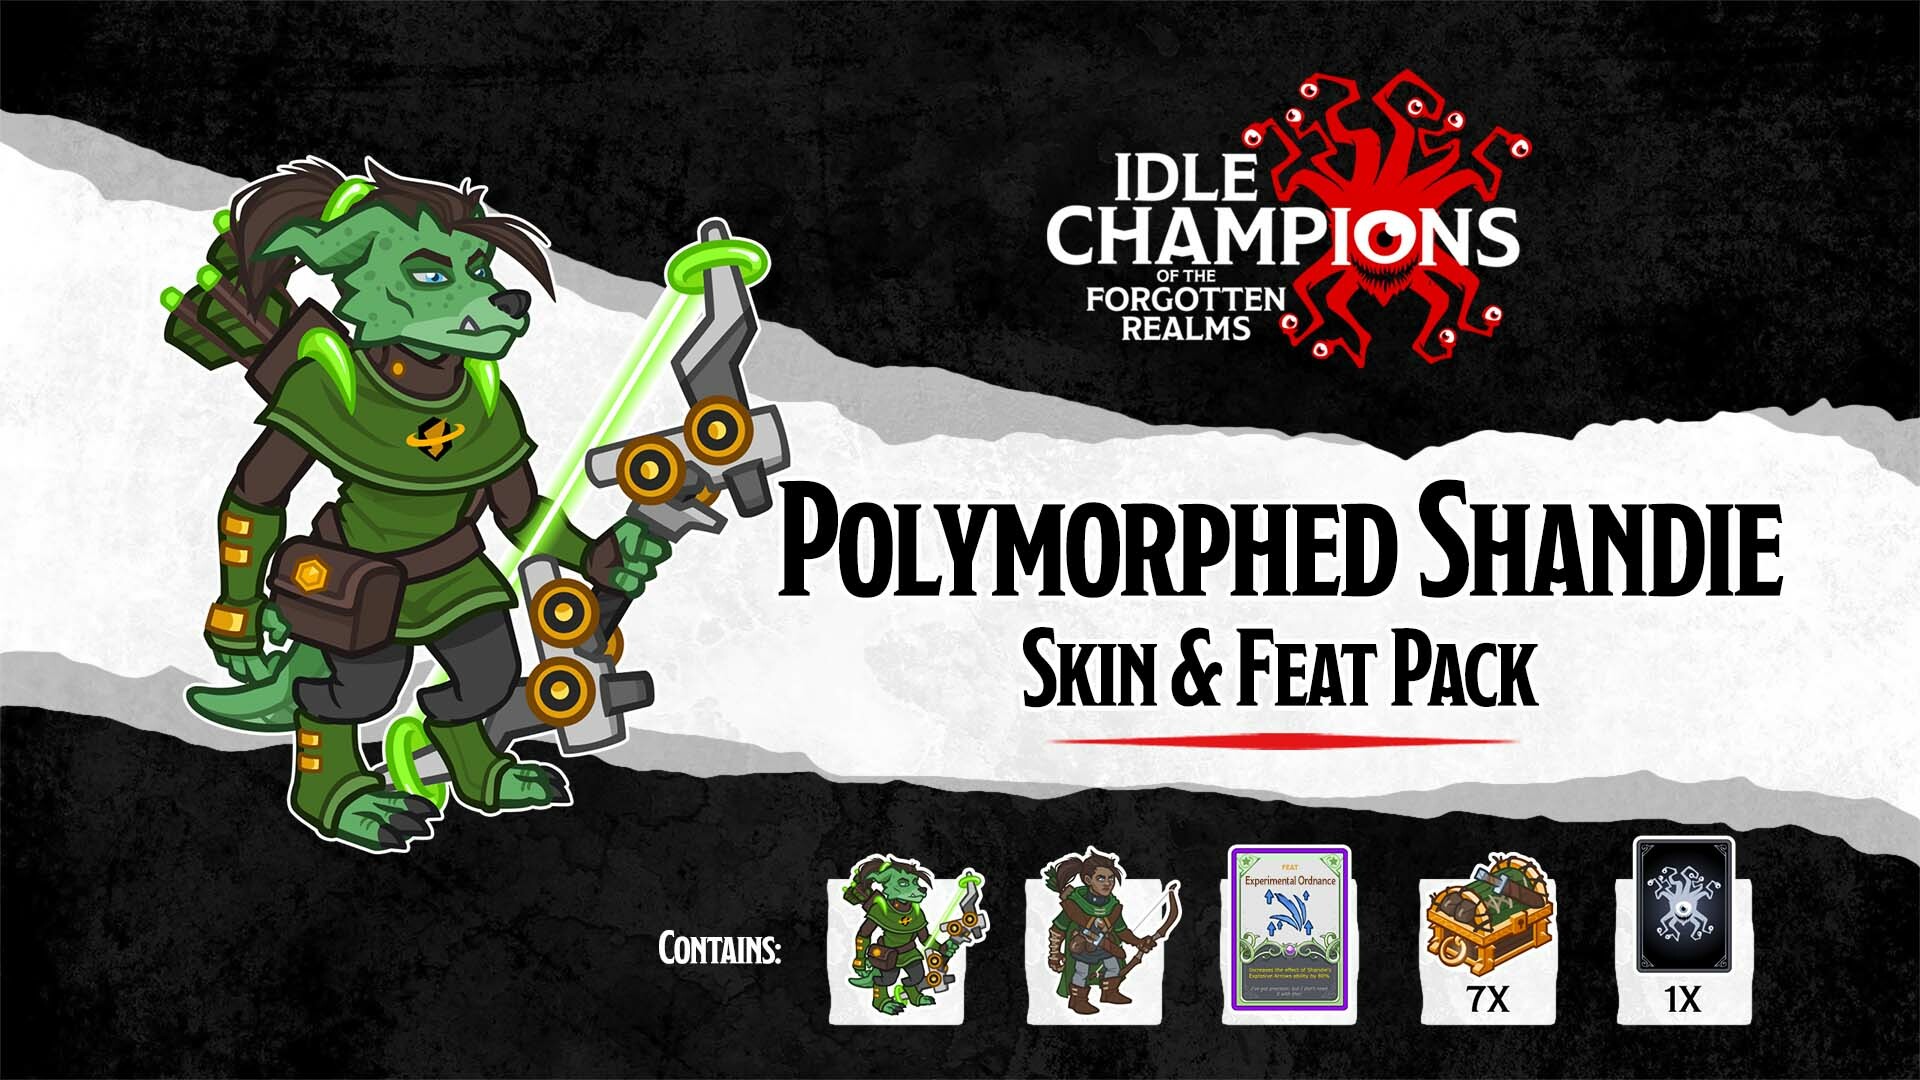 Idle Champions - Polymorphed Shandie Skin & Feat Pack DLC Steam CD Key [USD 1.02]